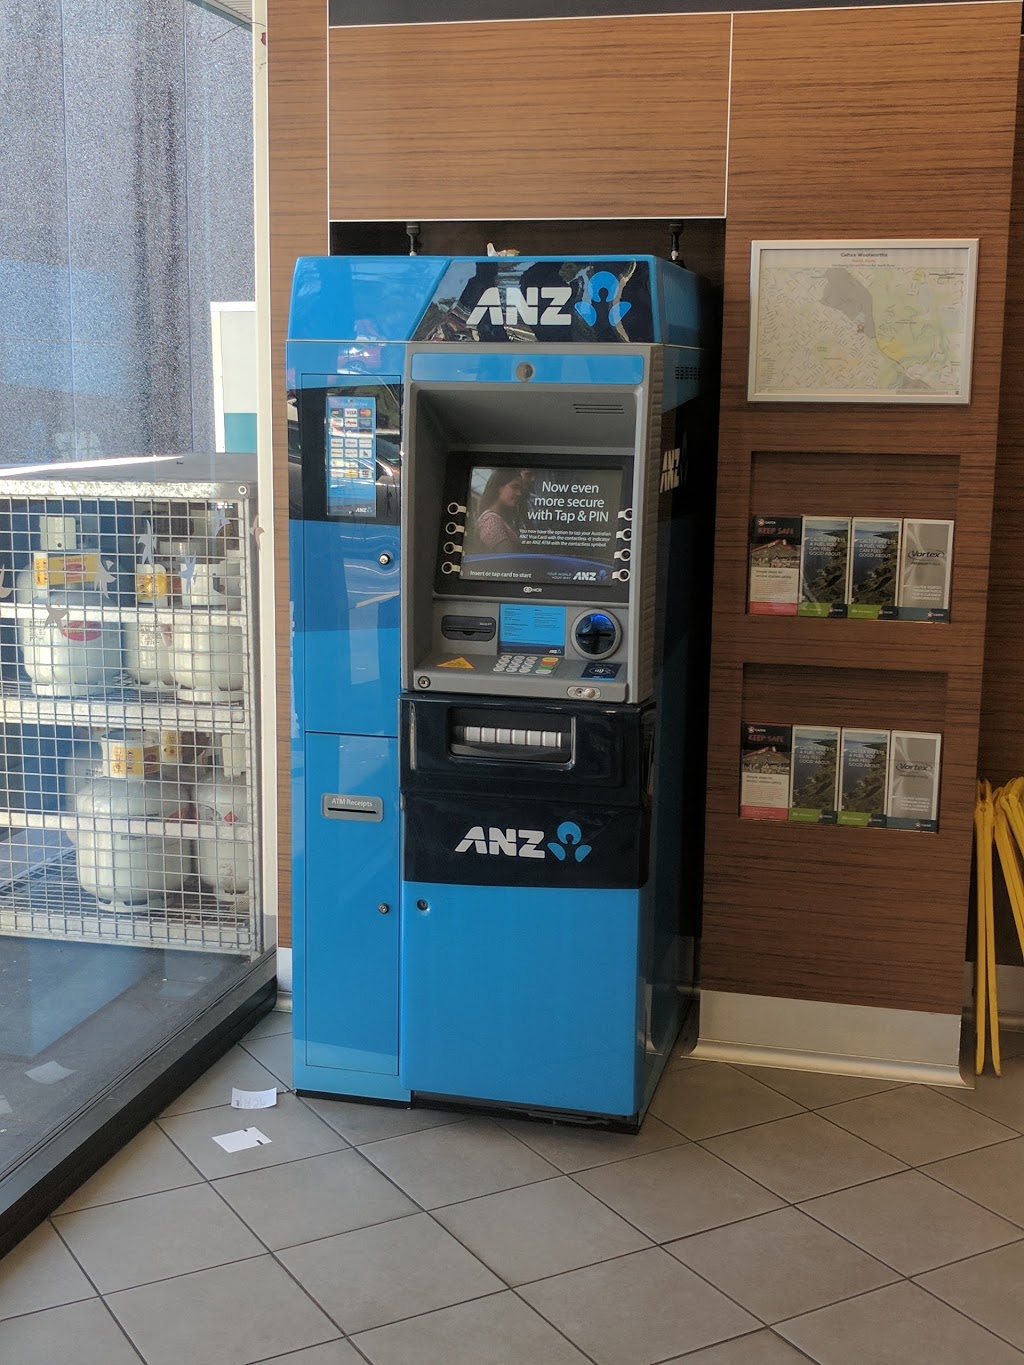 ANZ ATM North Ryde Caltex | 21cc/41 Epping Rd, North Ryde NSW 2113, Australia | Phone: 13 13 14